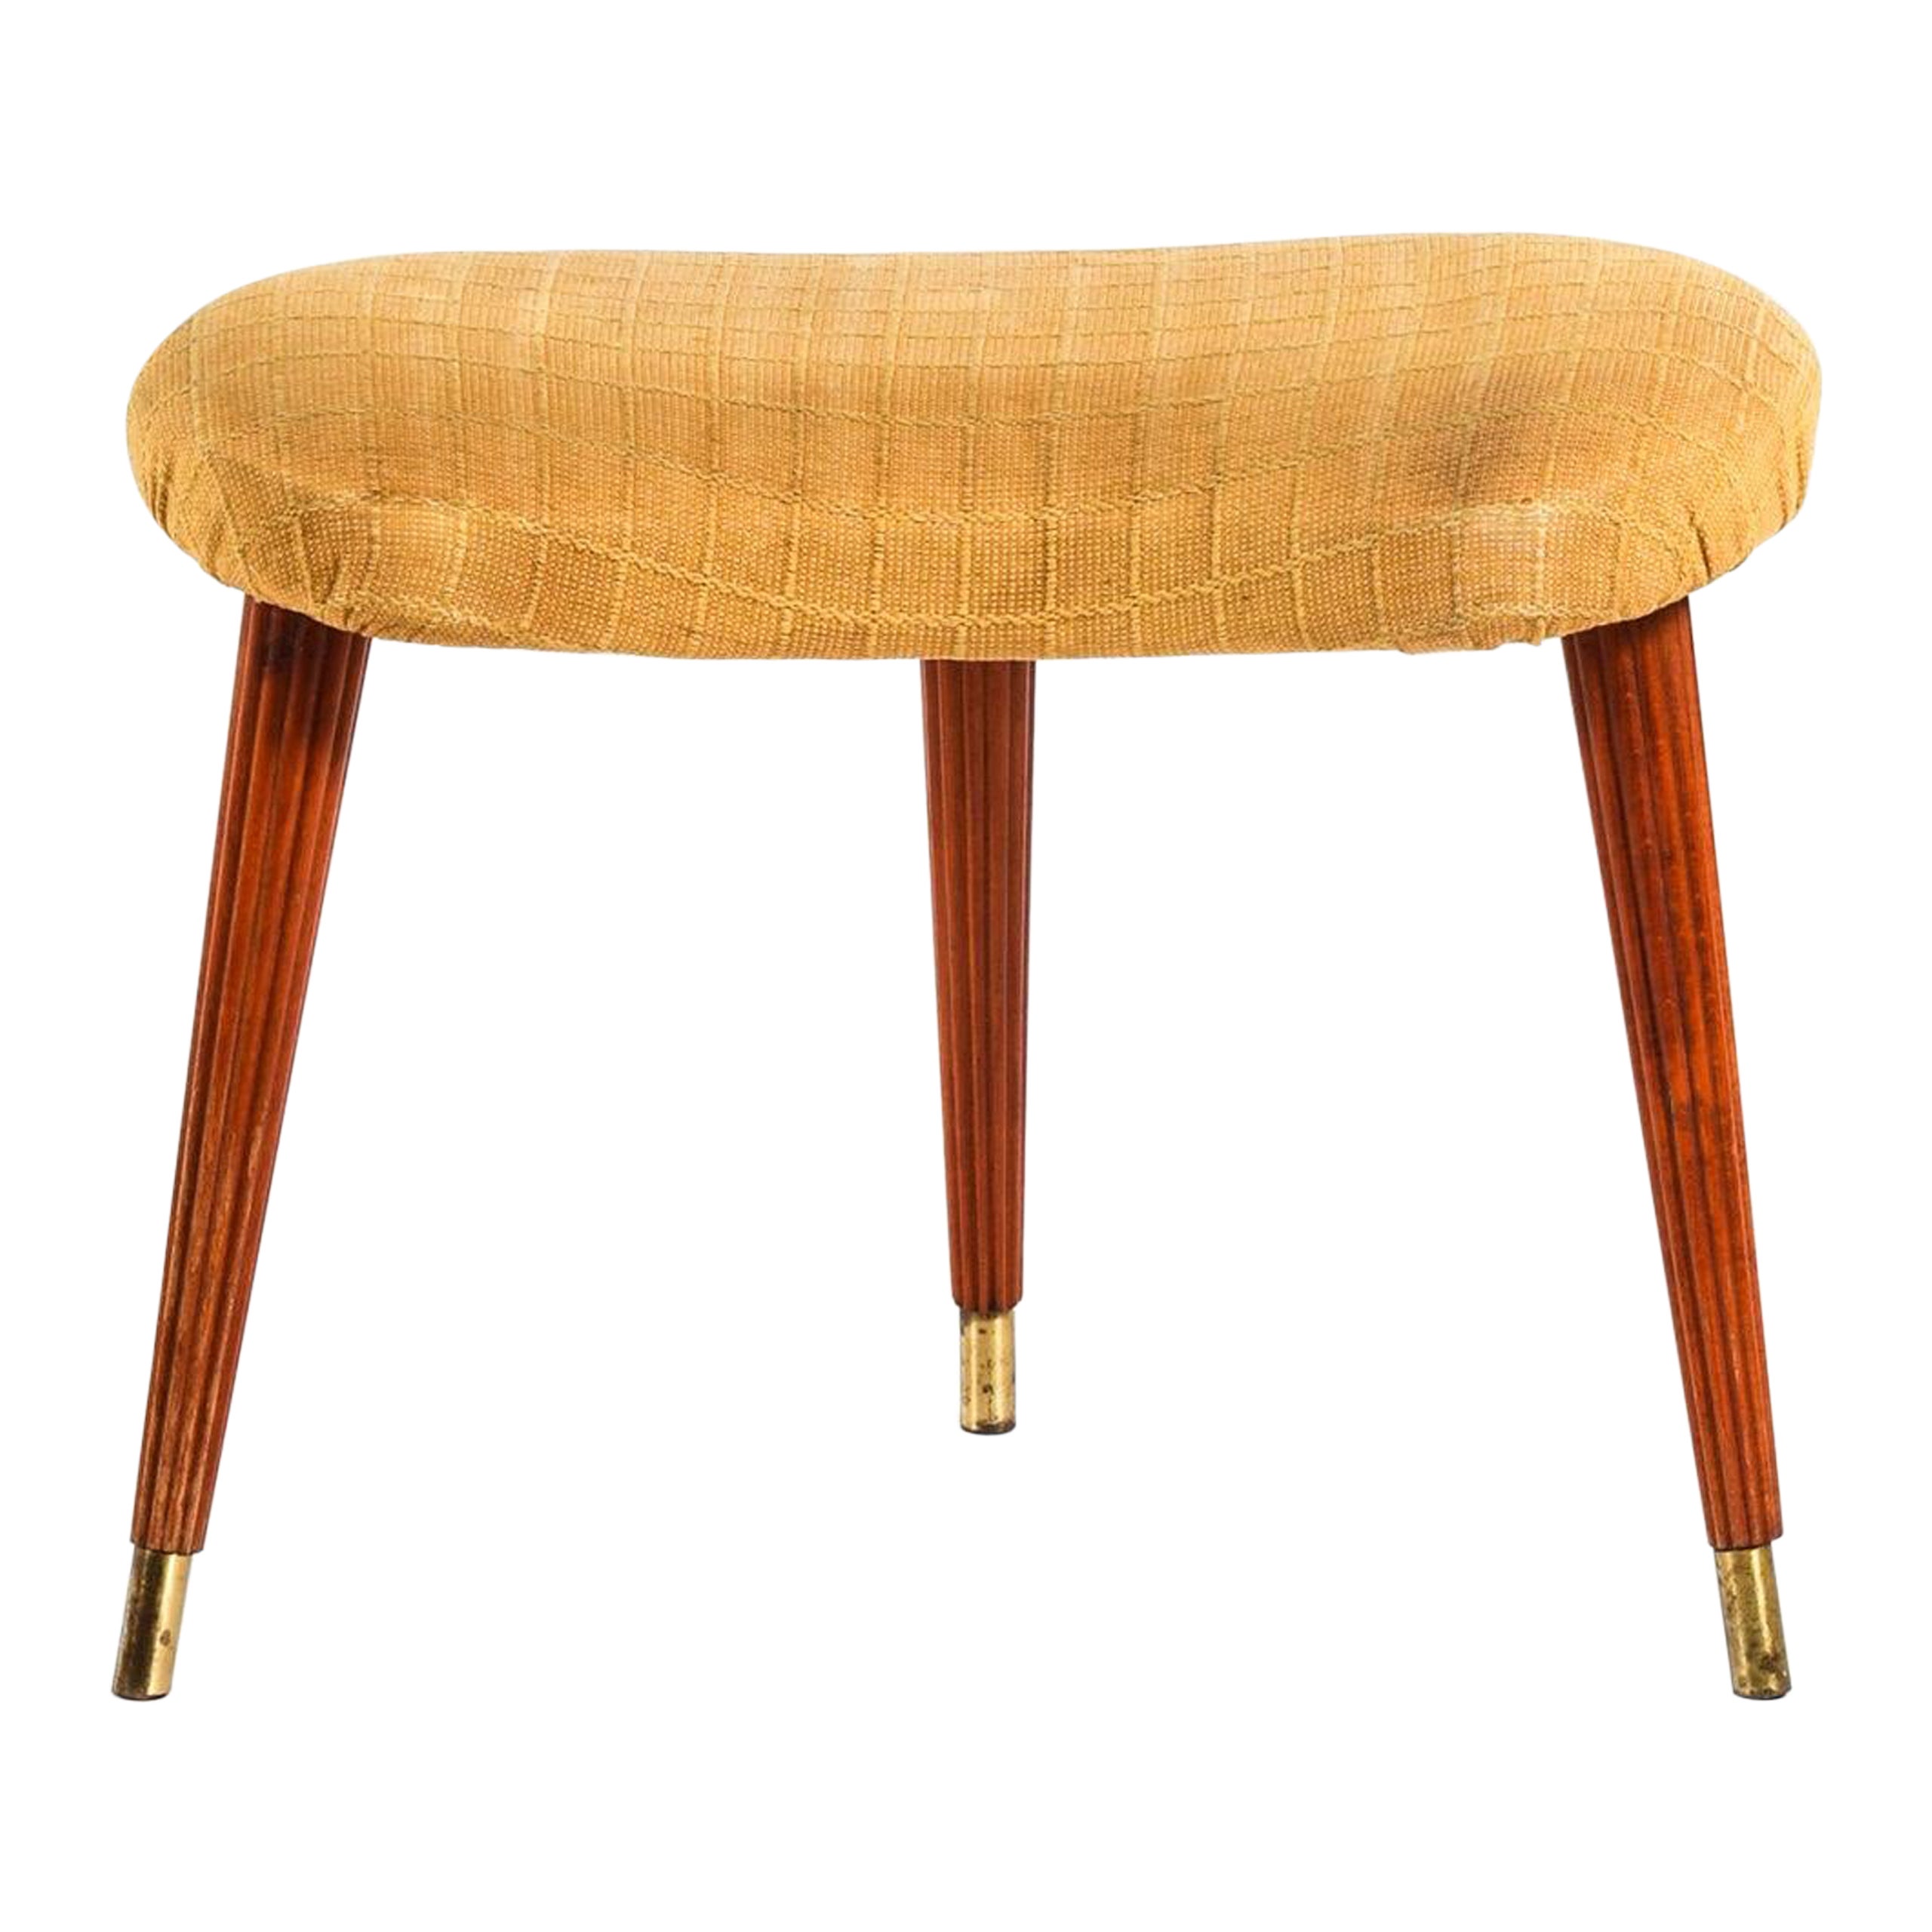 Stool Probably Produced by Bodafors in Sweden